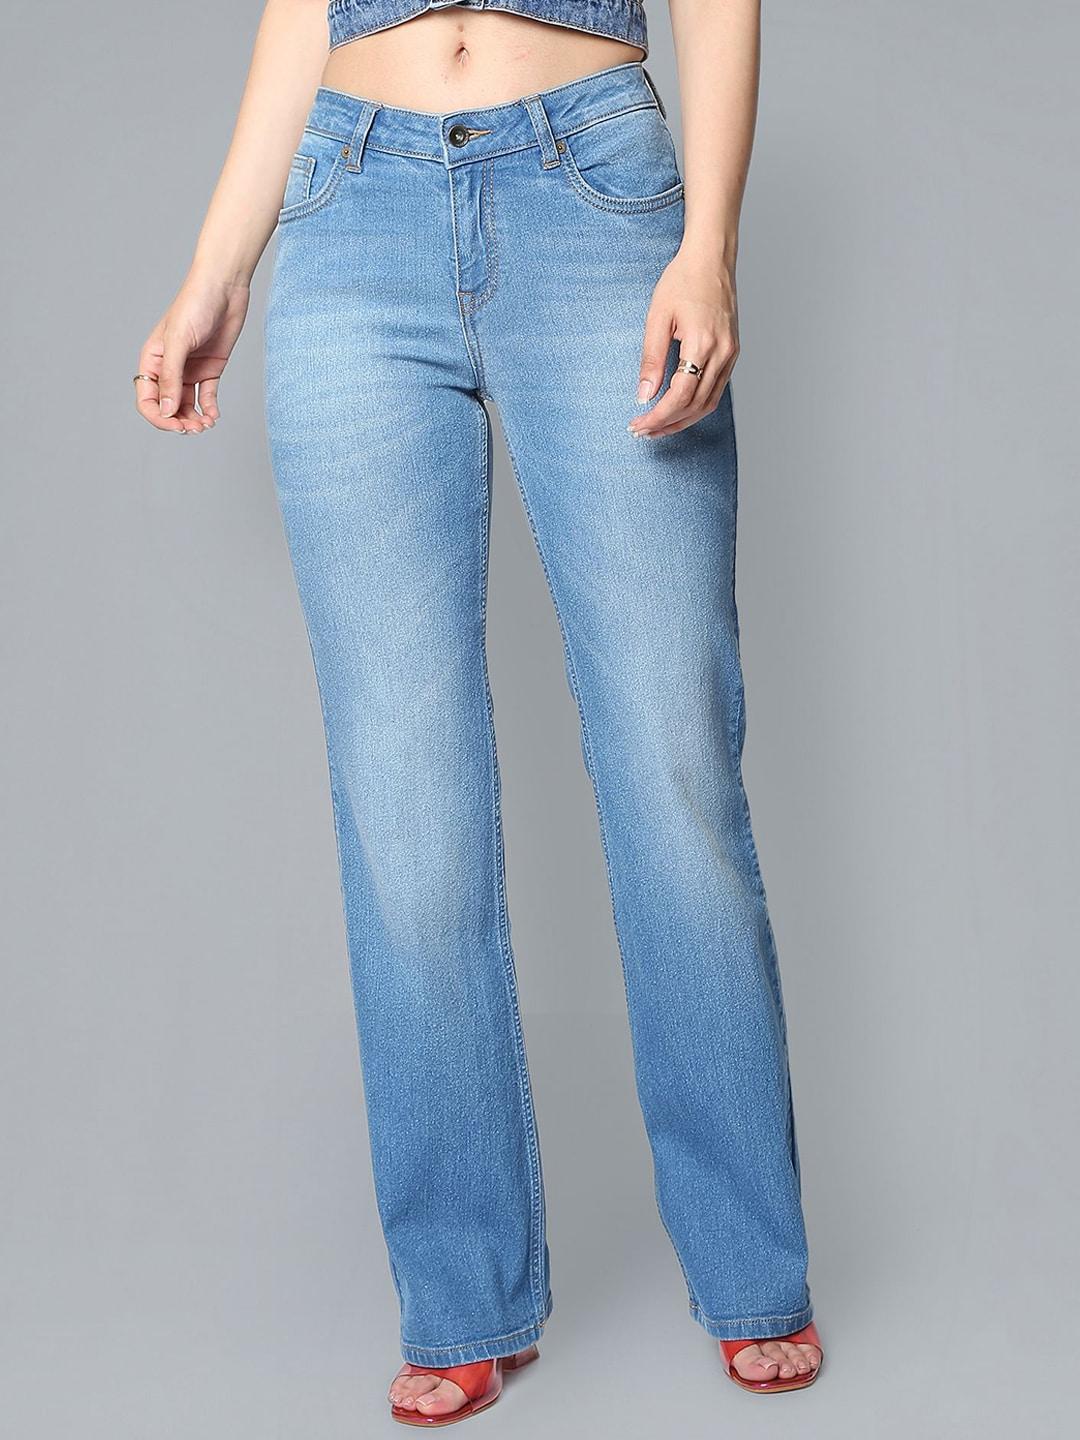 Flying Machine Women Bootcut Light Fade Stretchable Jeans